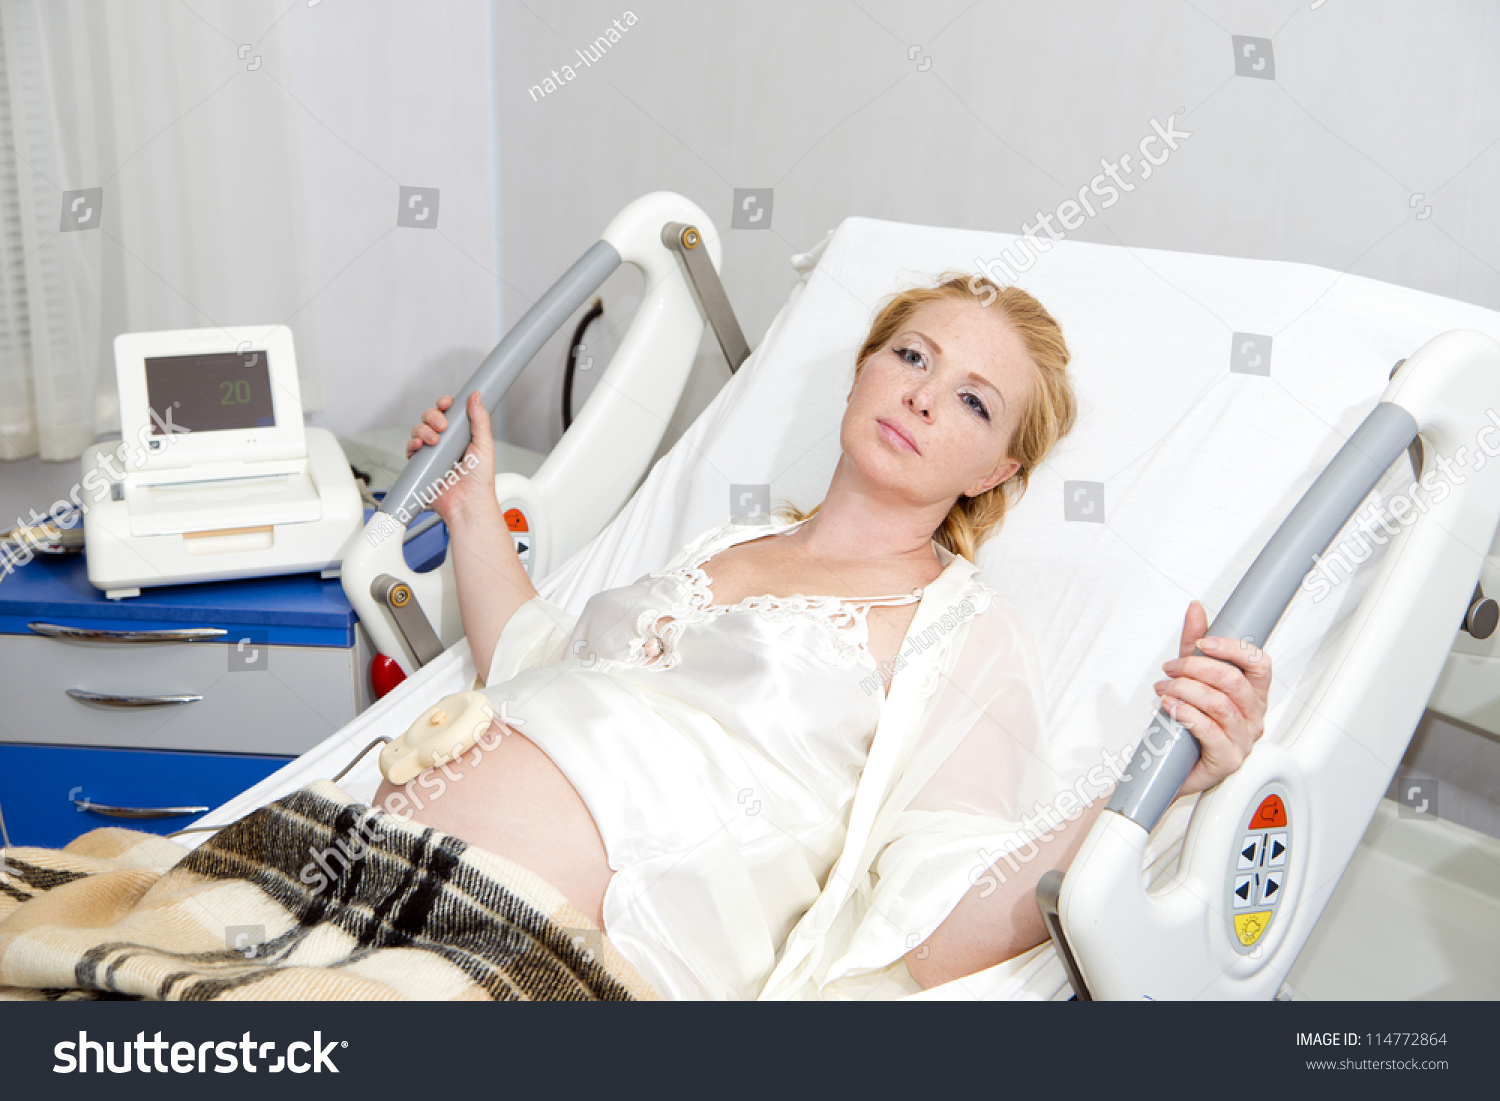 Pregnant Woman In Hospital 103